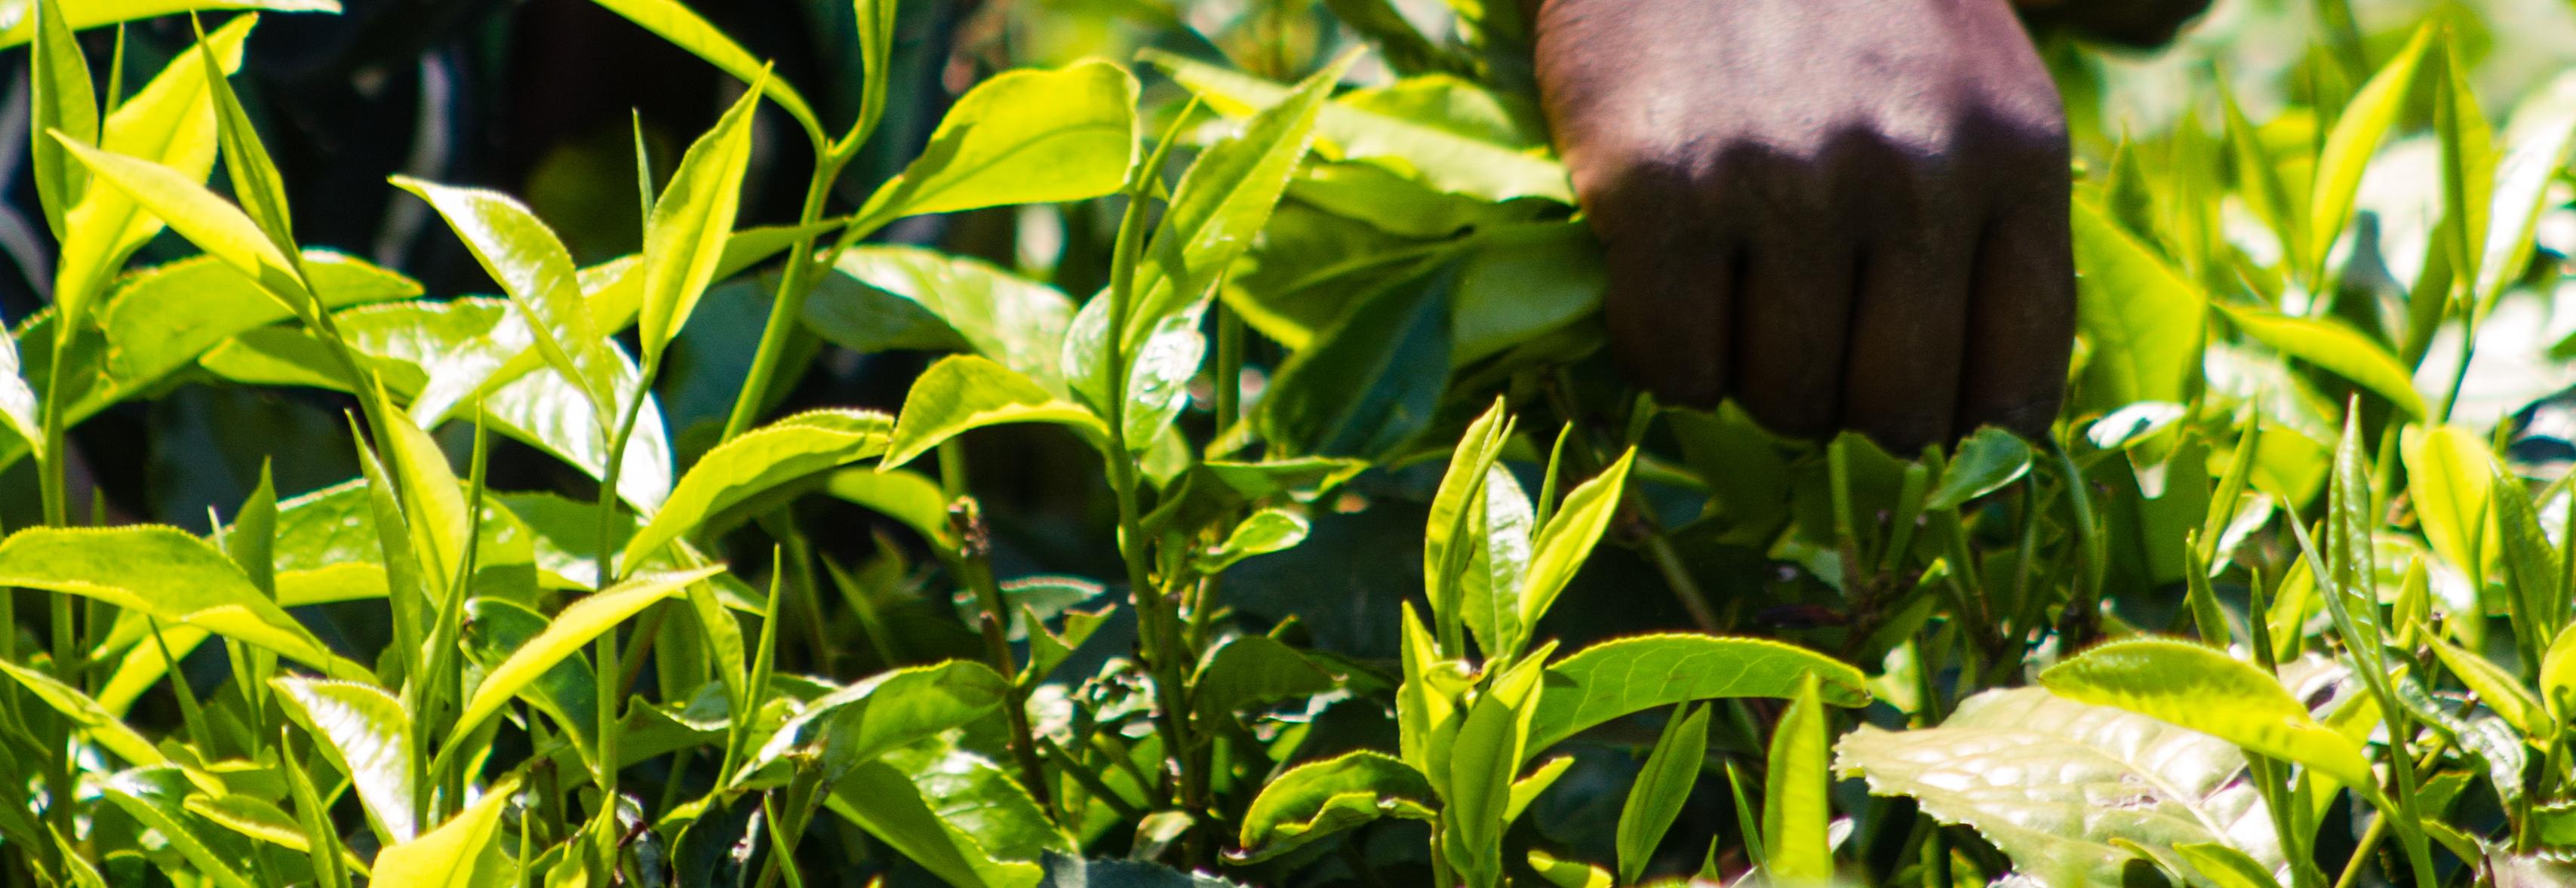 Close up of workers hands picking tea leaves in Malawi